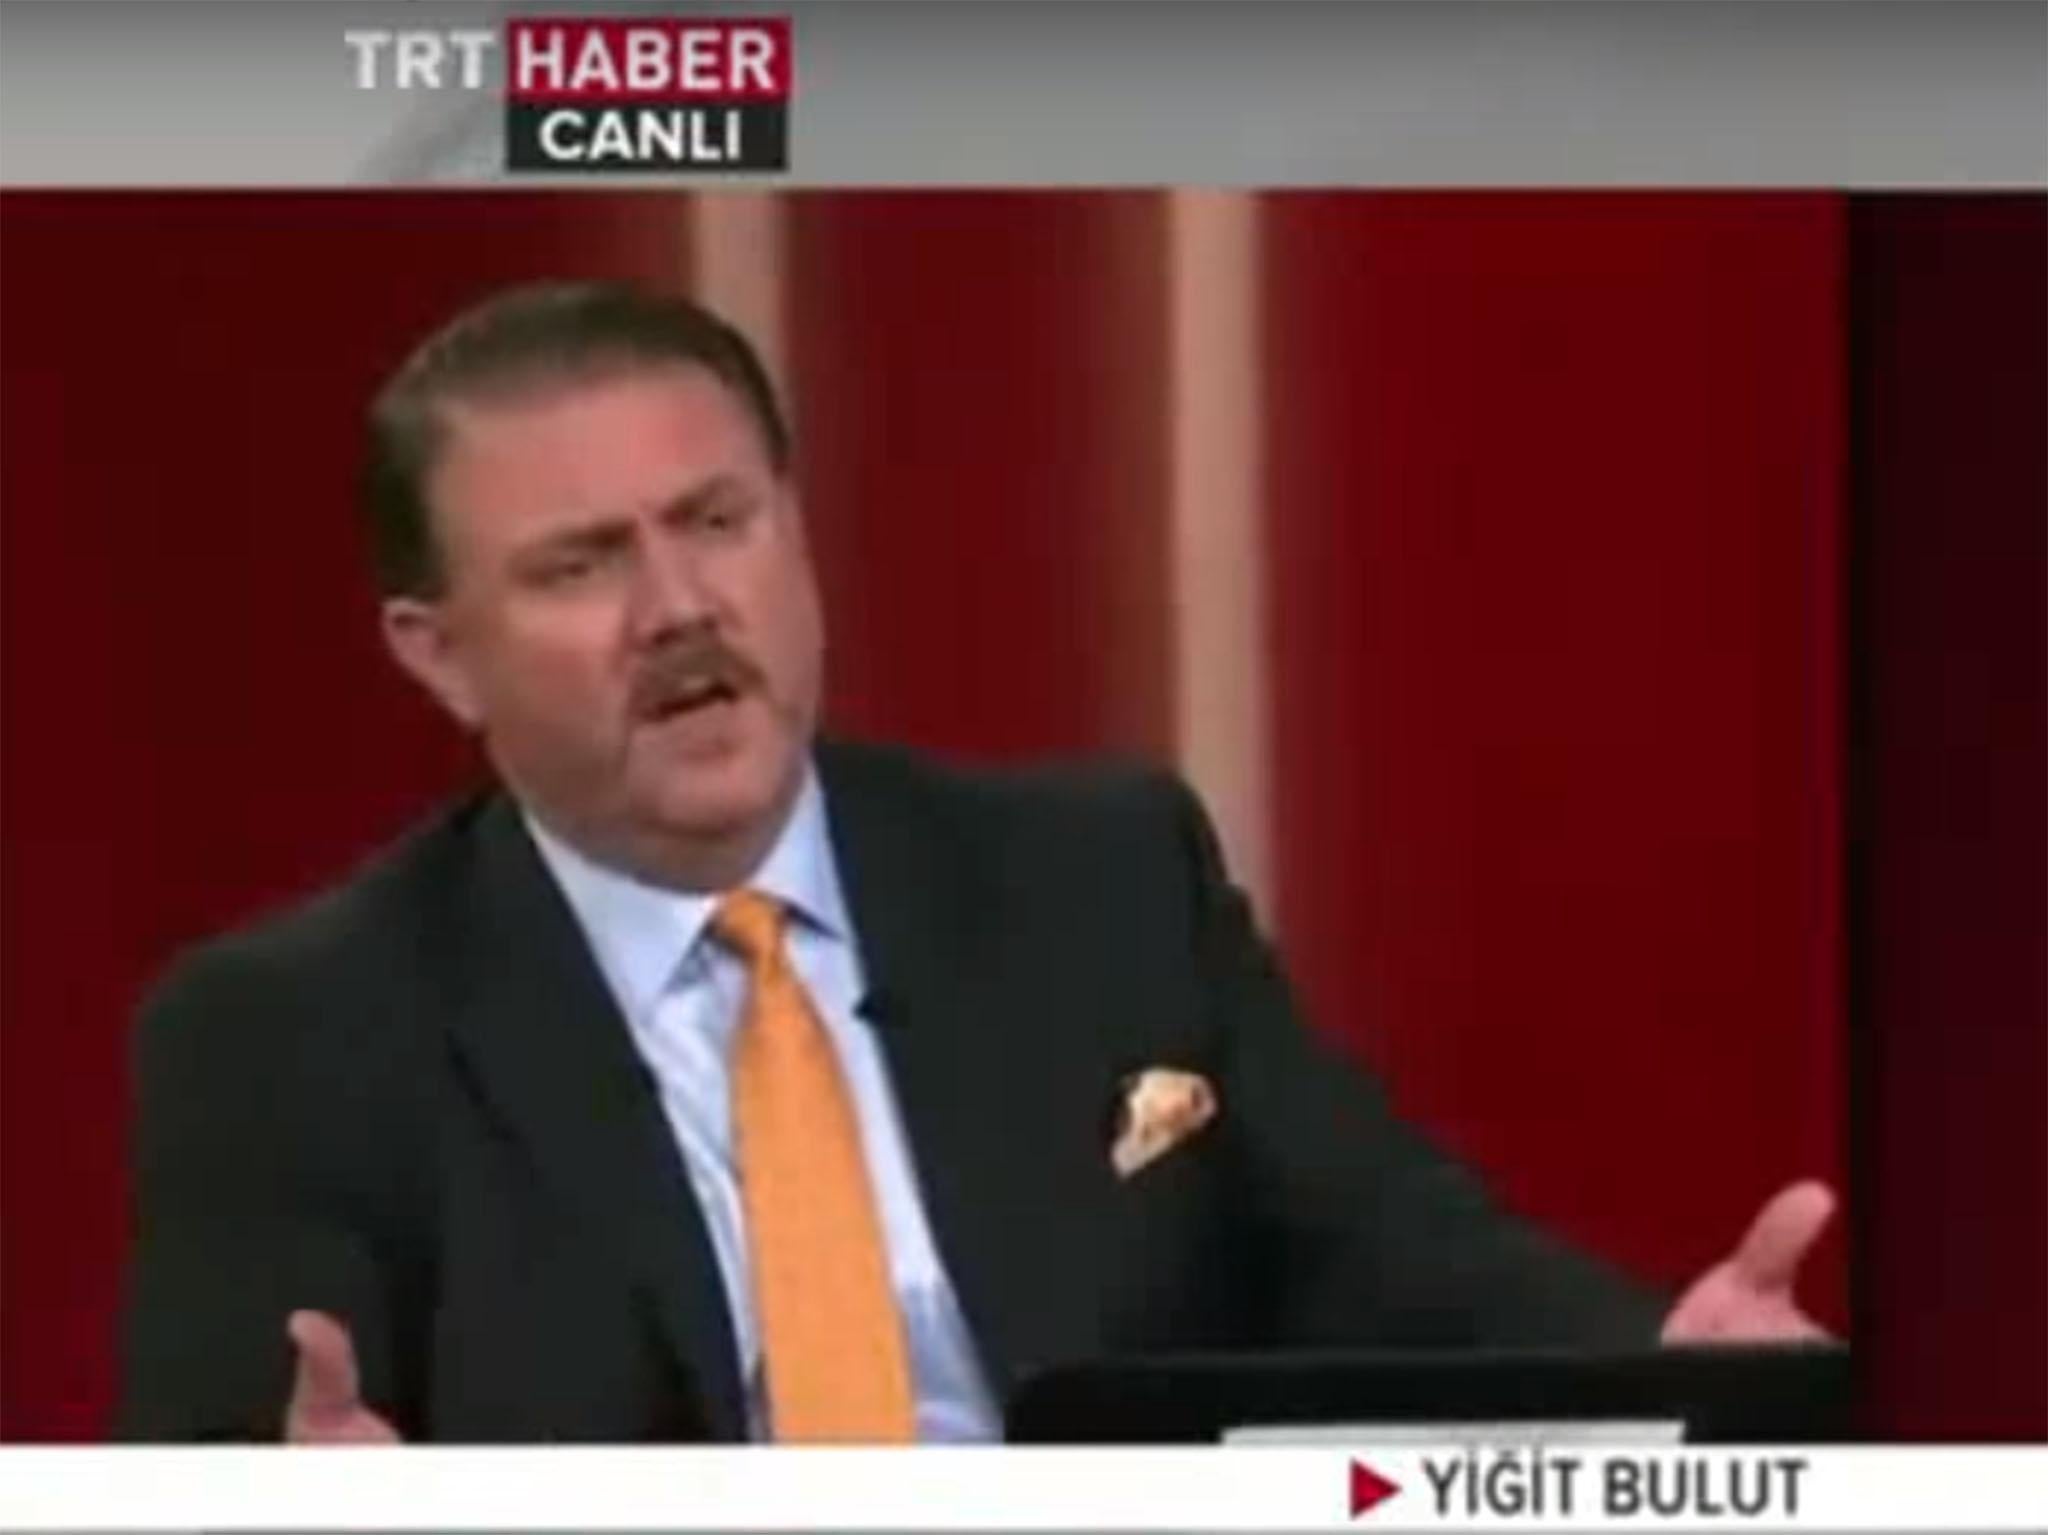 Former journalist Yiğit Bulut is a regular on state television channel TRT Haber